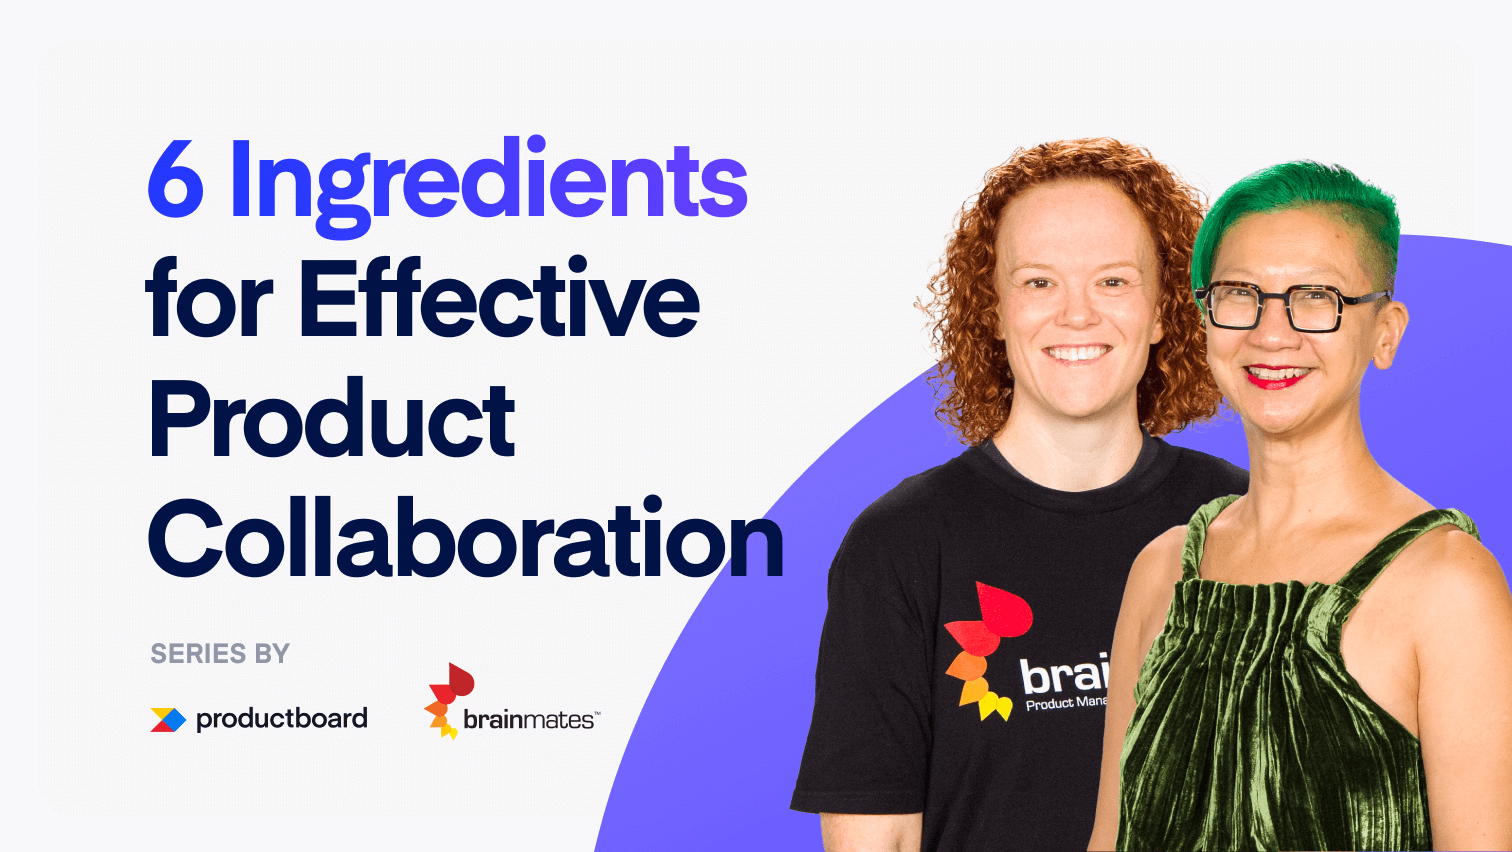 6 Ingredients for Effective Product Collaboration